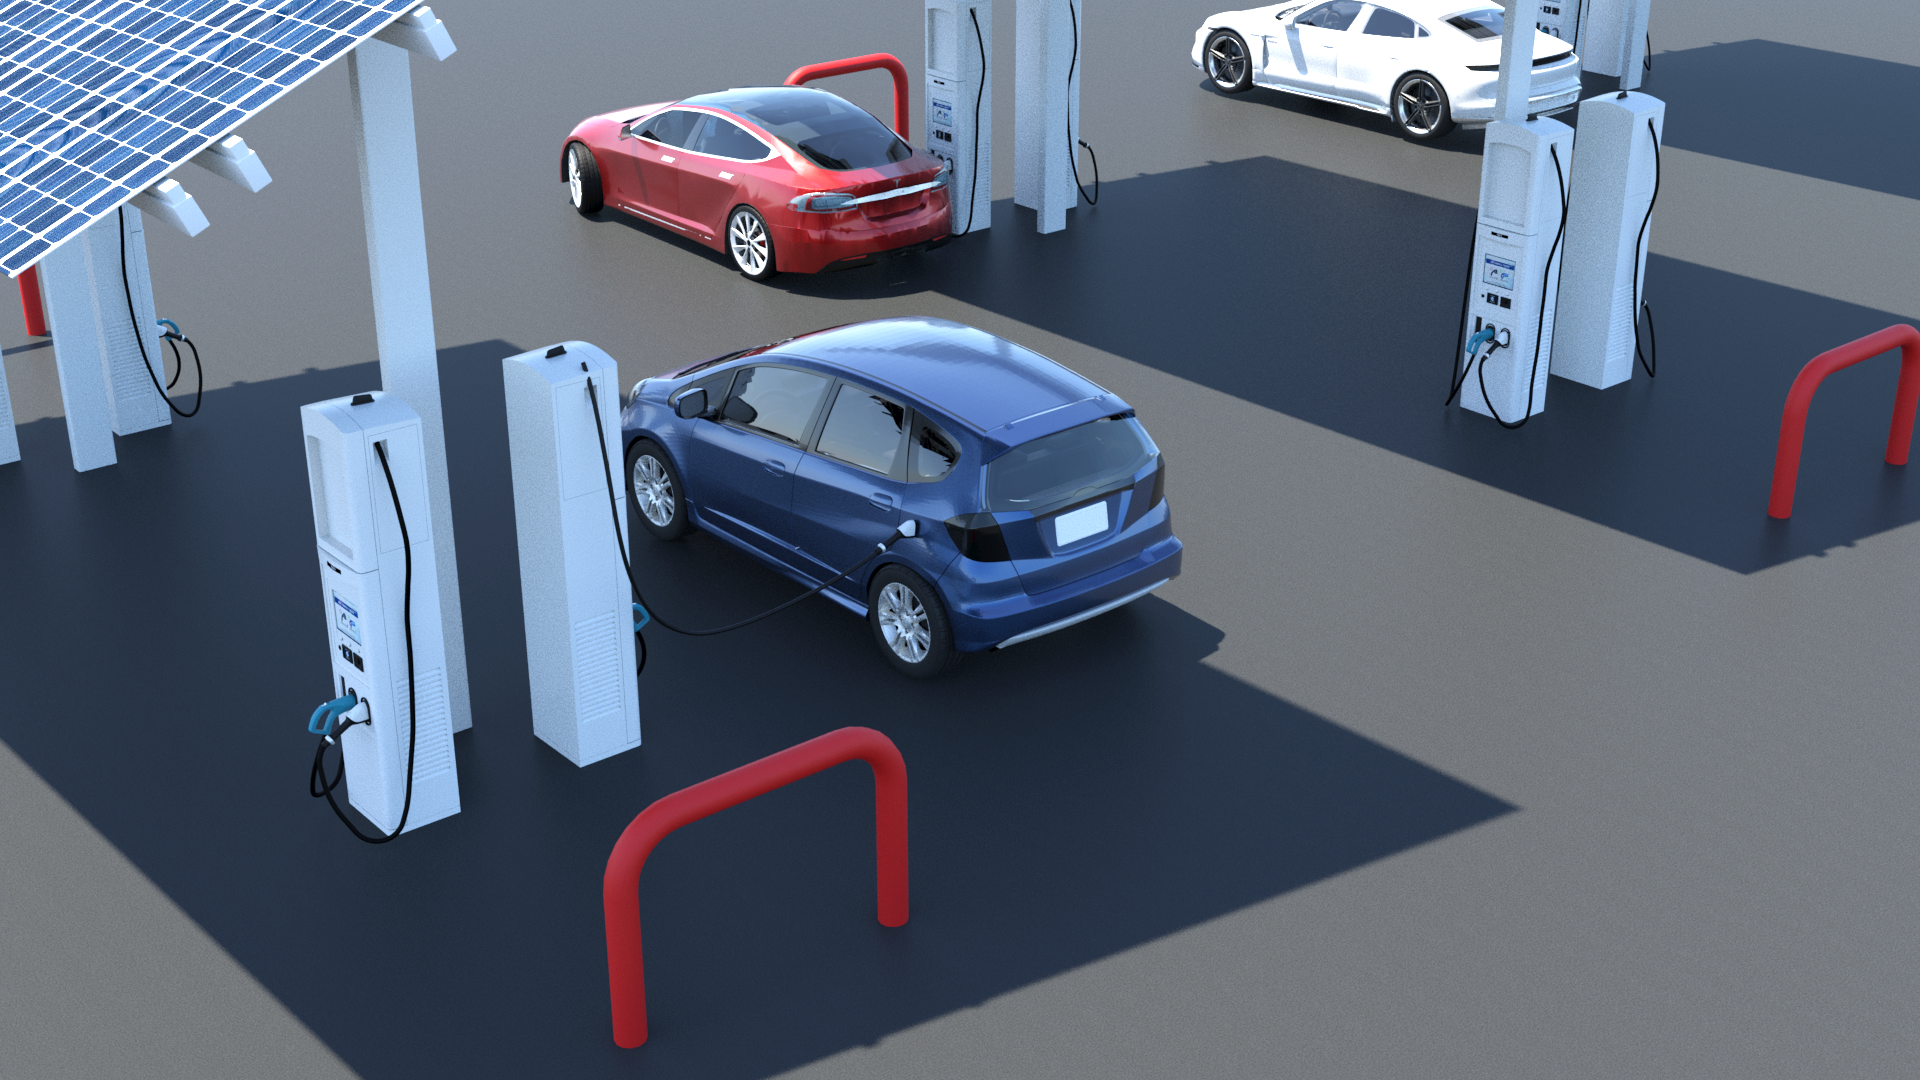 A pull-through EV charging station similar to a gas station. 3 rows of chargers, each with 4 chargers. Solar panel roof provides shelter. Curb cut outs and clear floor space at all EV chargers.